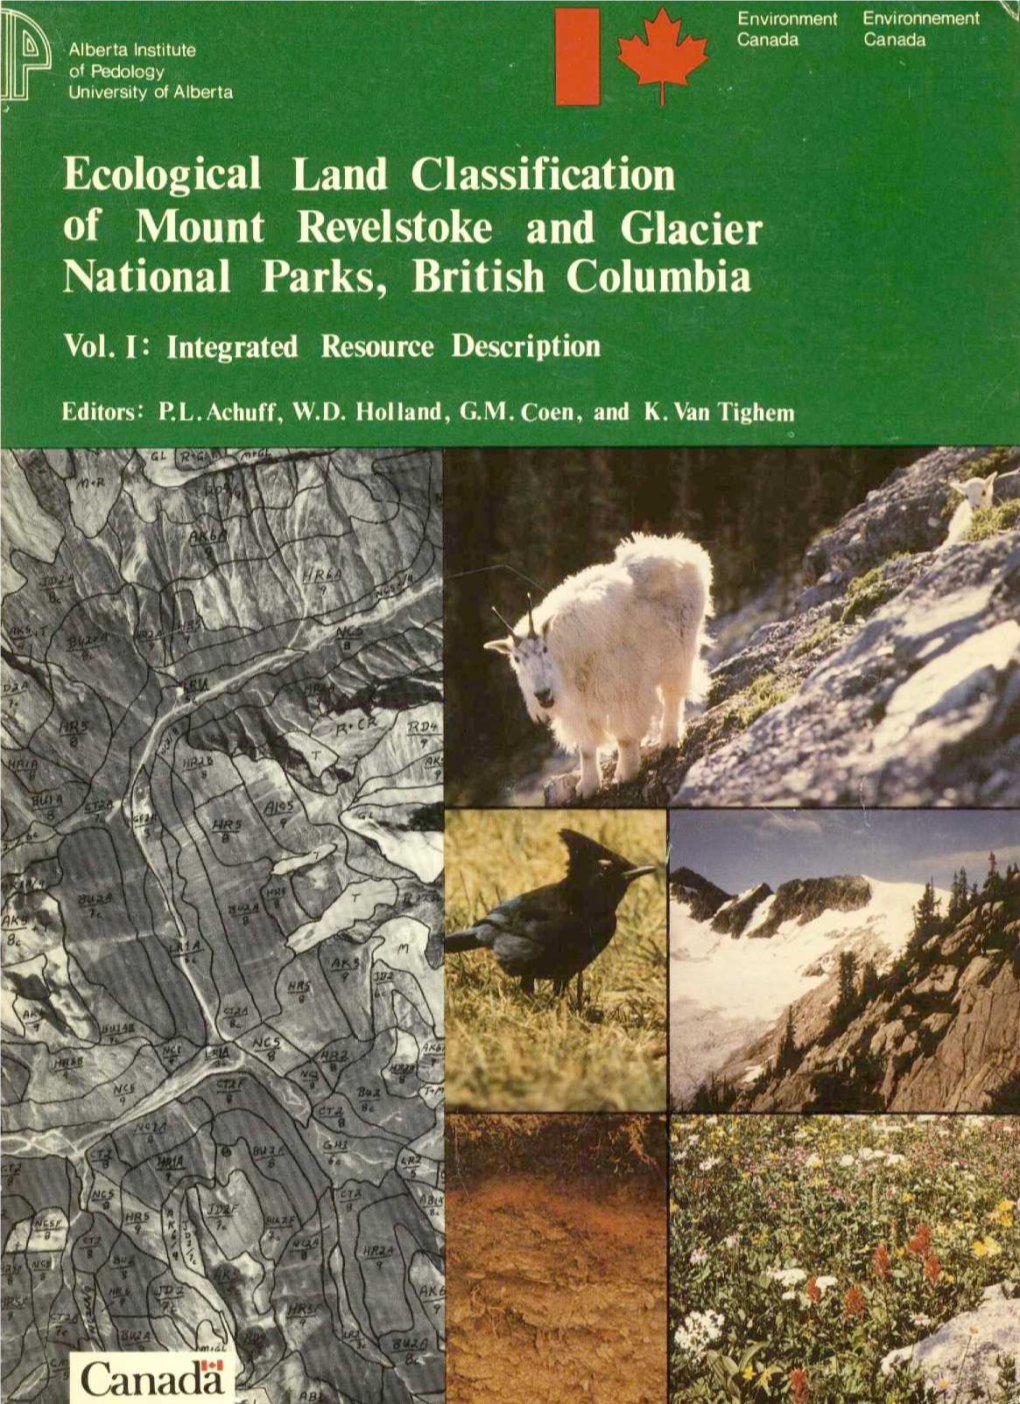 Ecological Land Classification of Mount Revelstoke and Glacier National